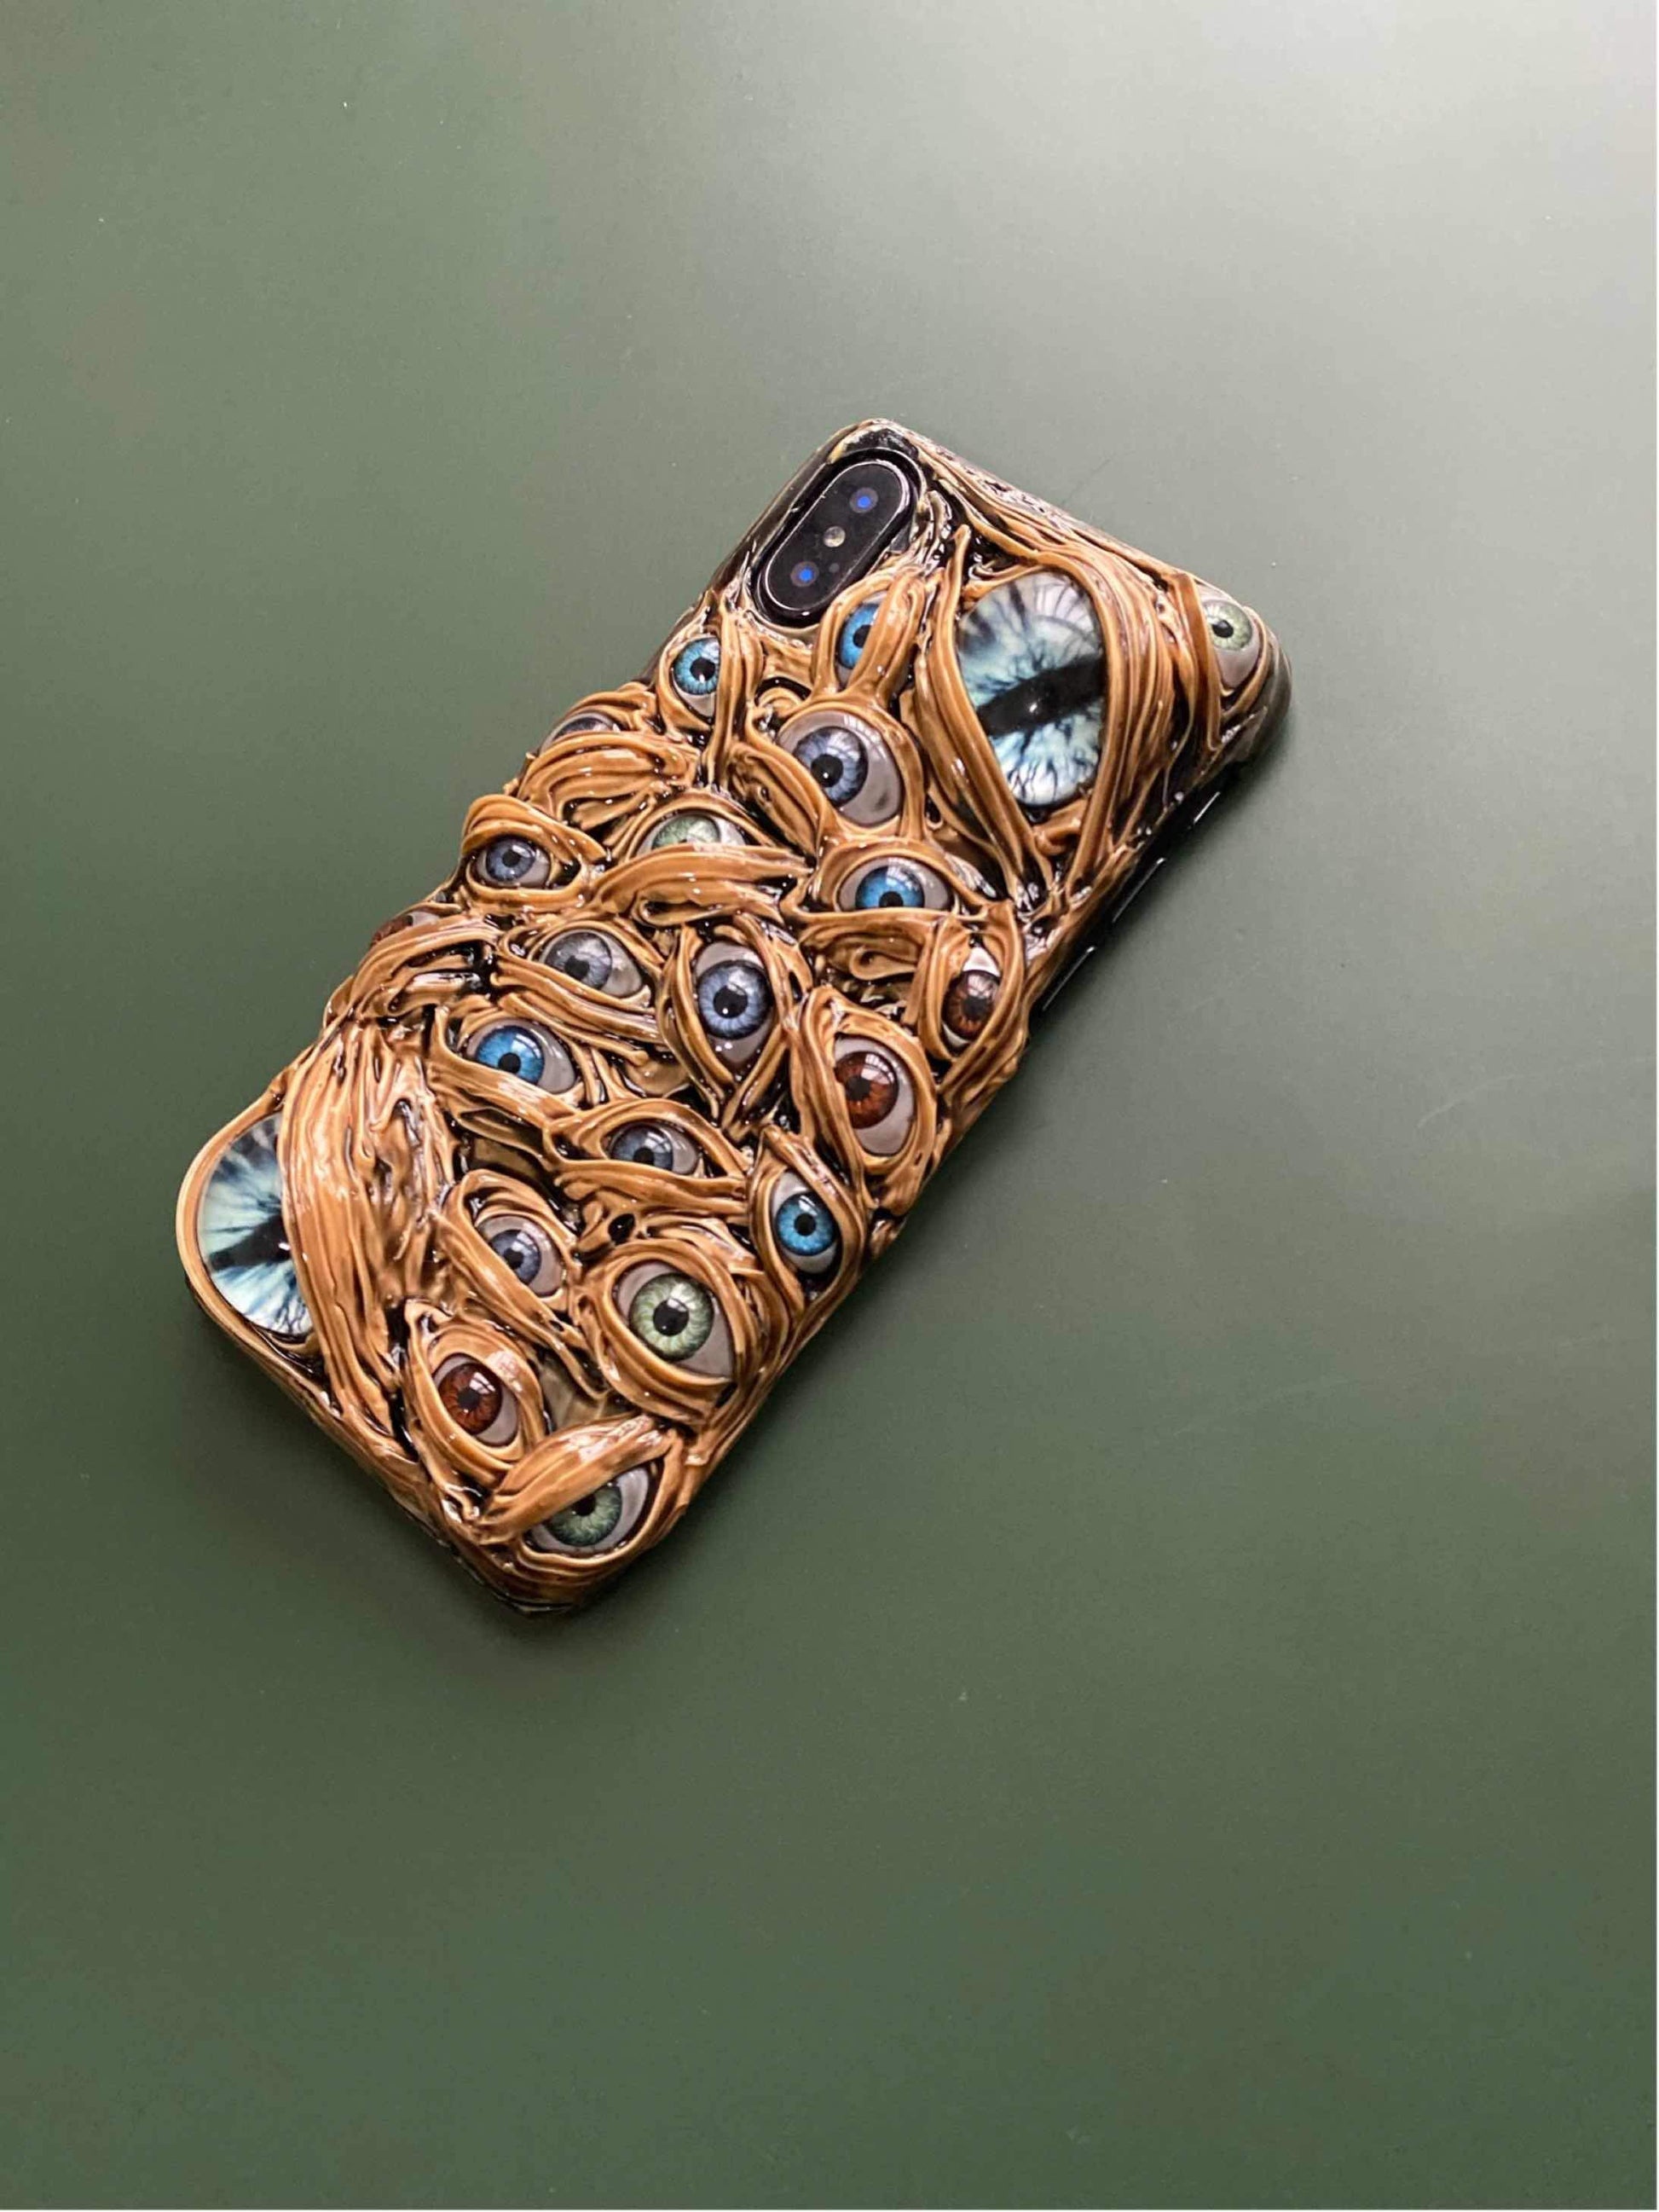 Techypop iPhone Case The Monster Eyes Handmade Designer iPhone Case For iPhone 12 SE 11 Pro Max X XS Max XR 7 8 Plus